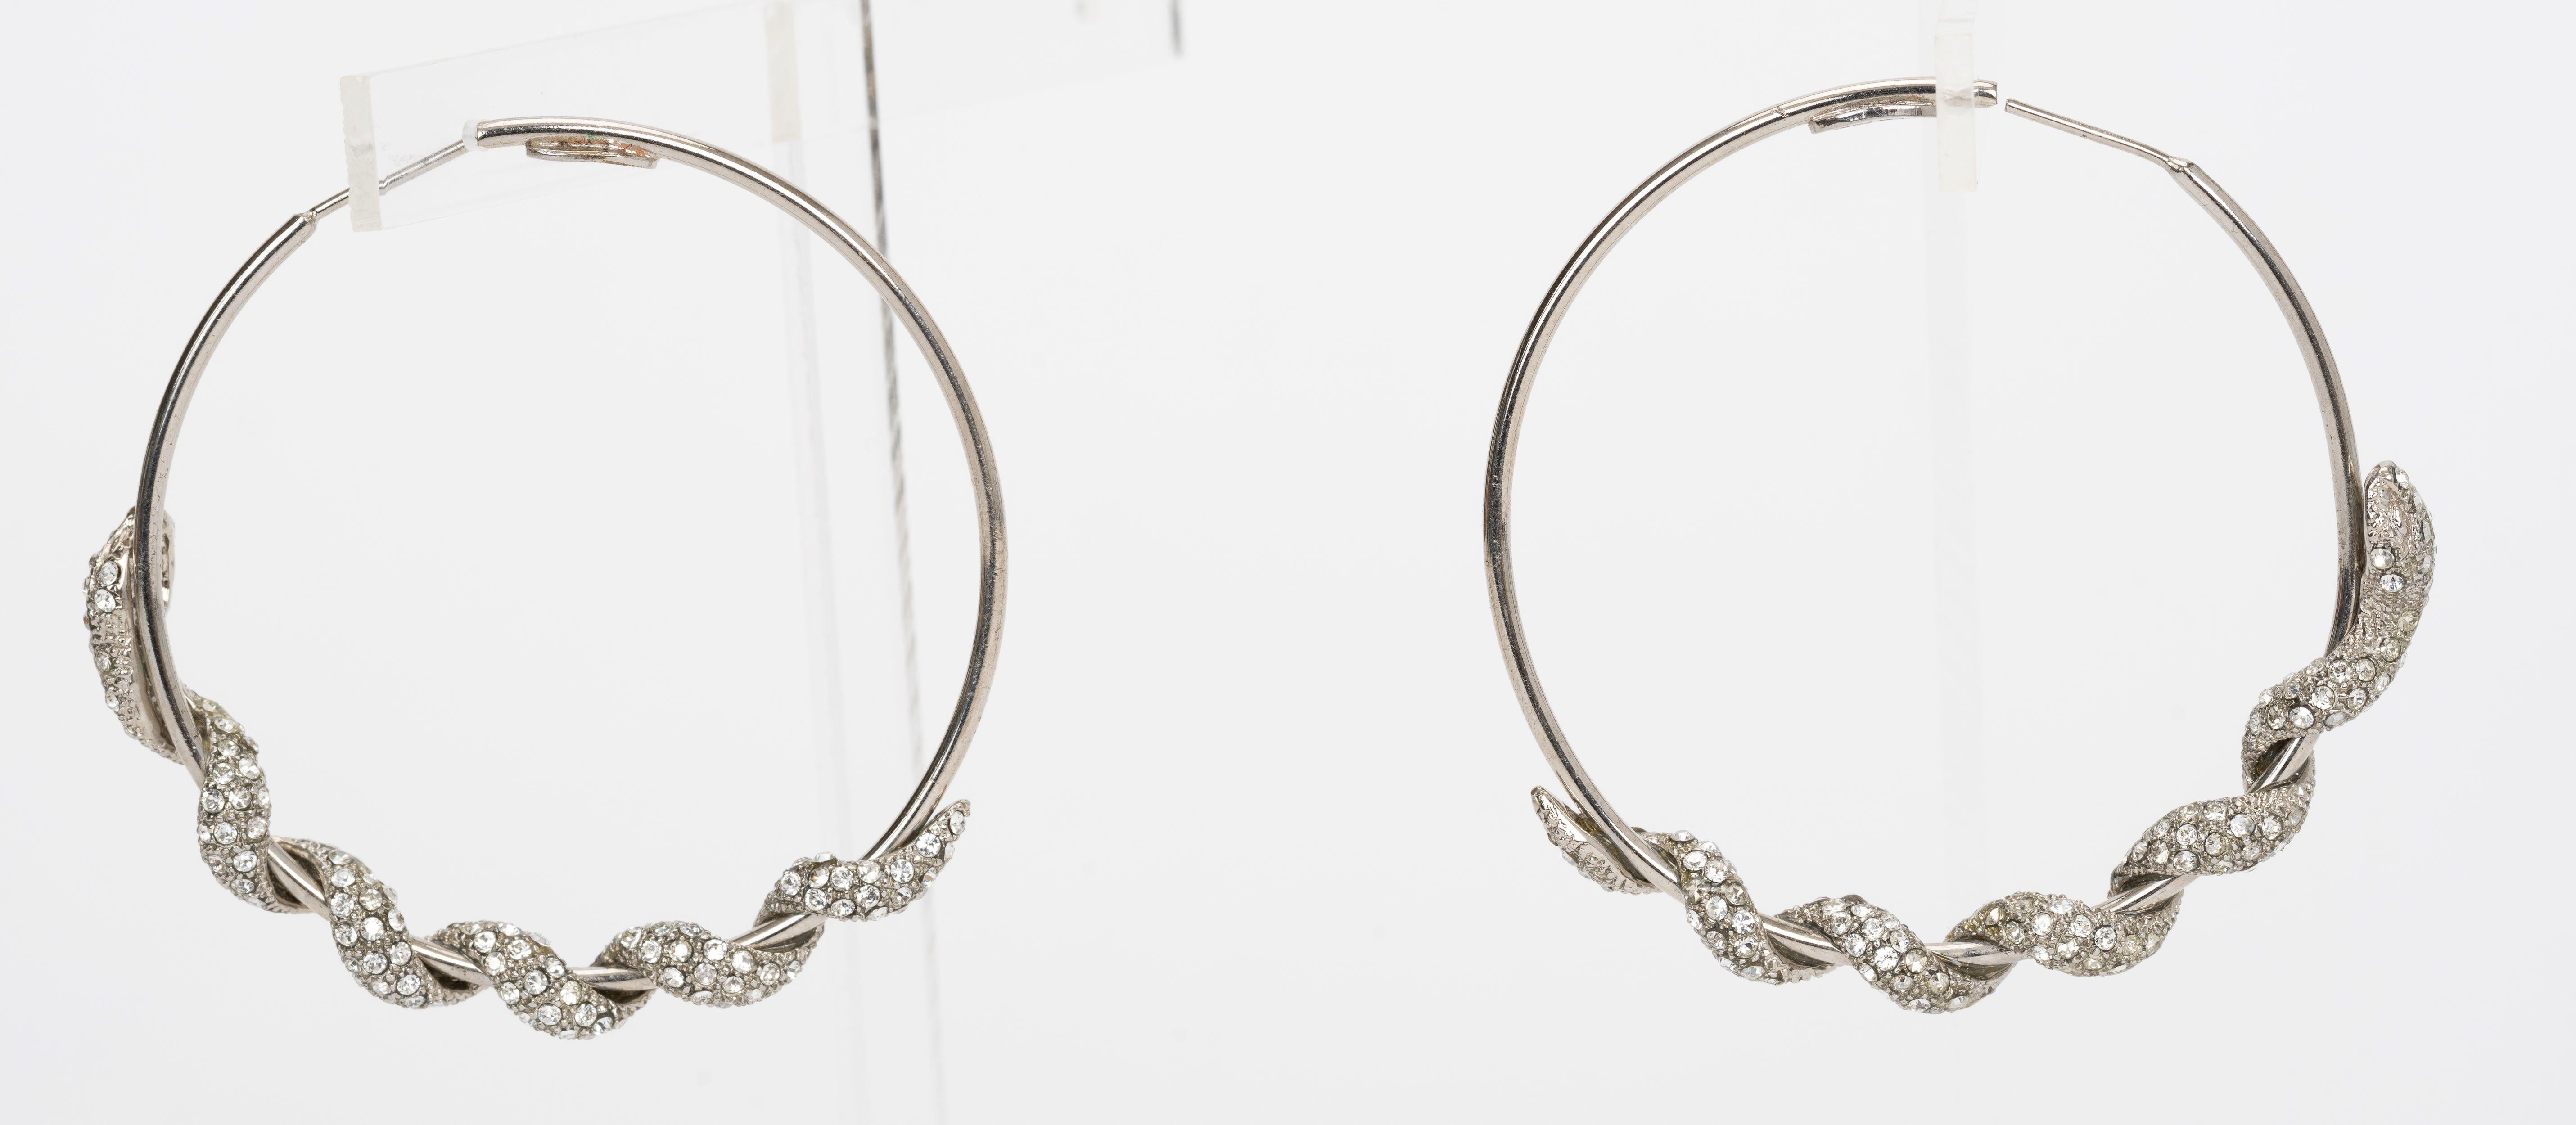 Roberto Cavalli Snake Hoop Earrings In Excellent Condition For Sale In West Hollywood, CA